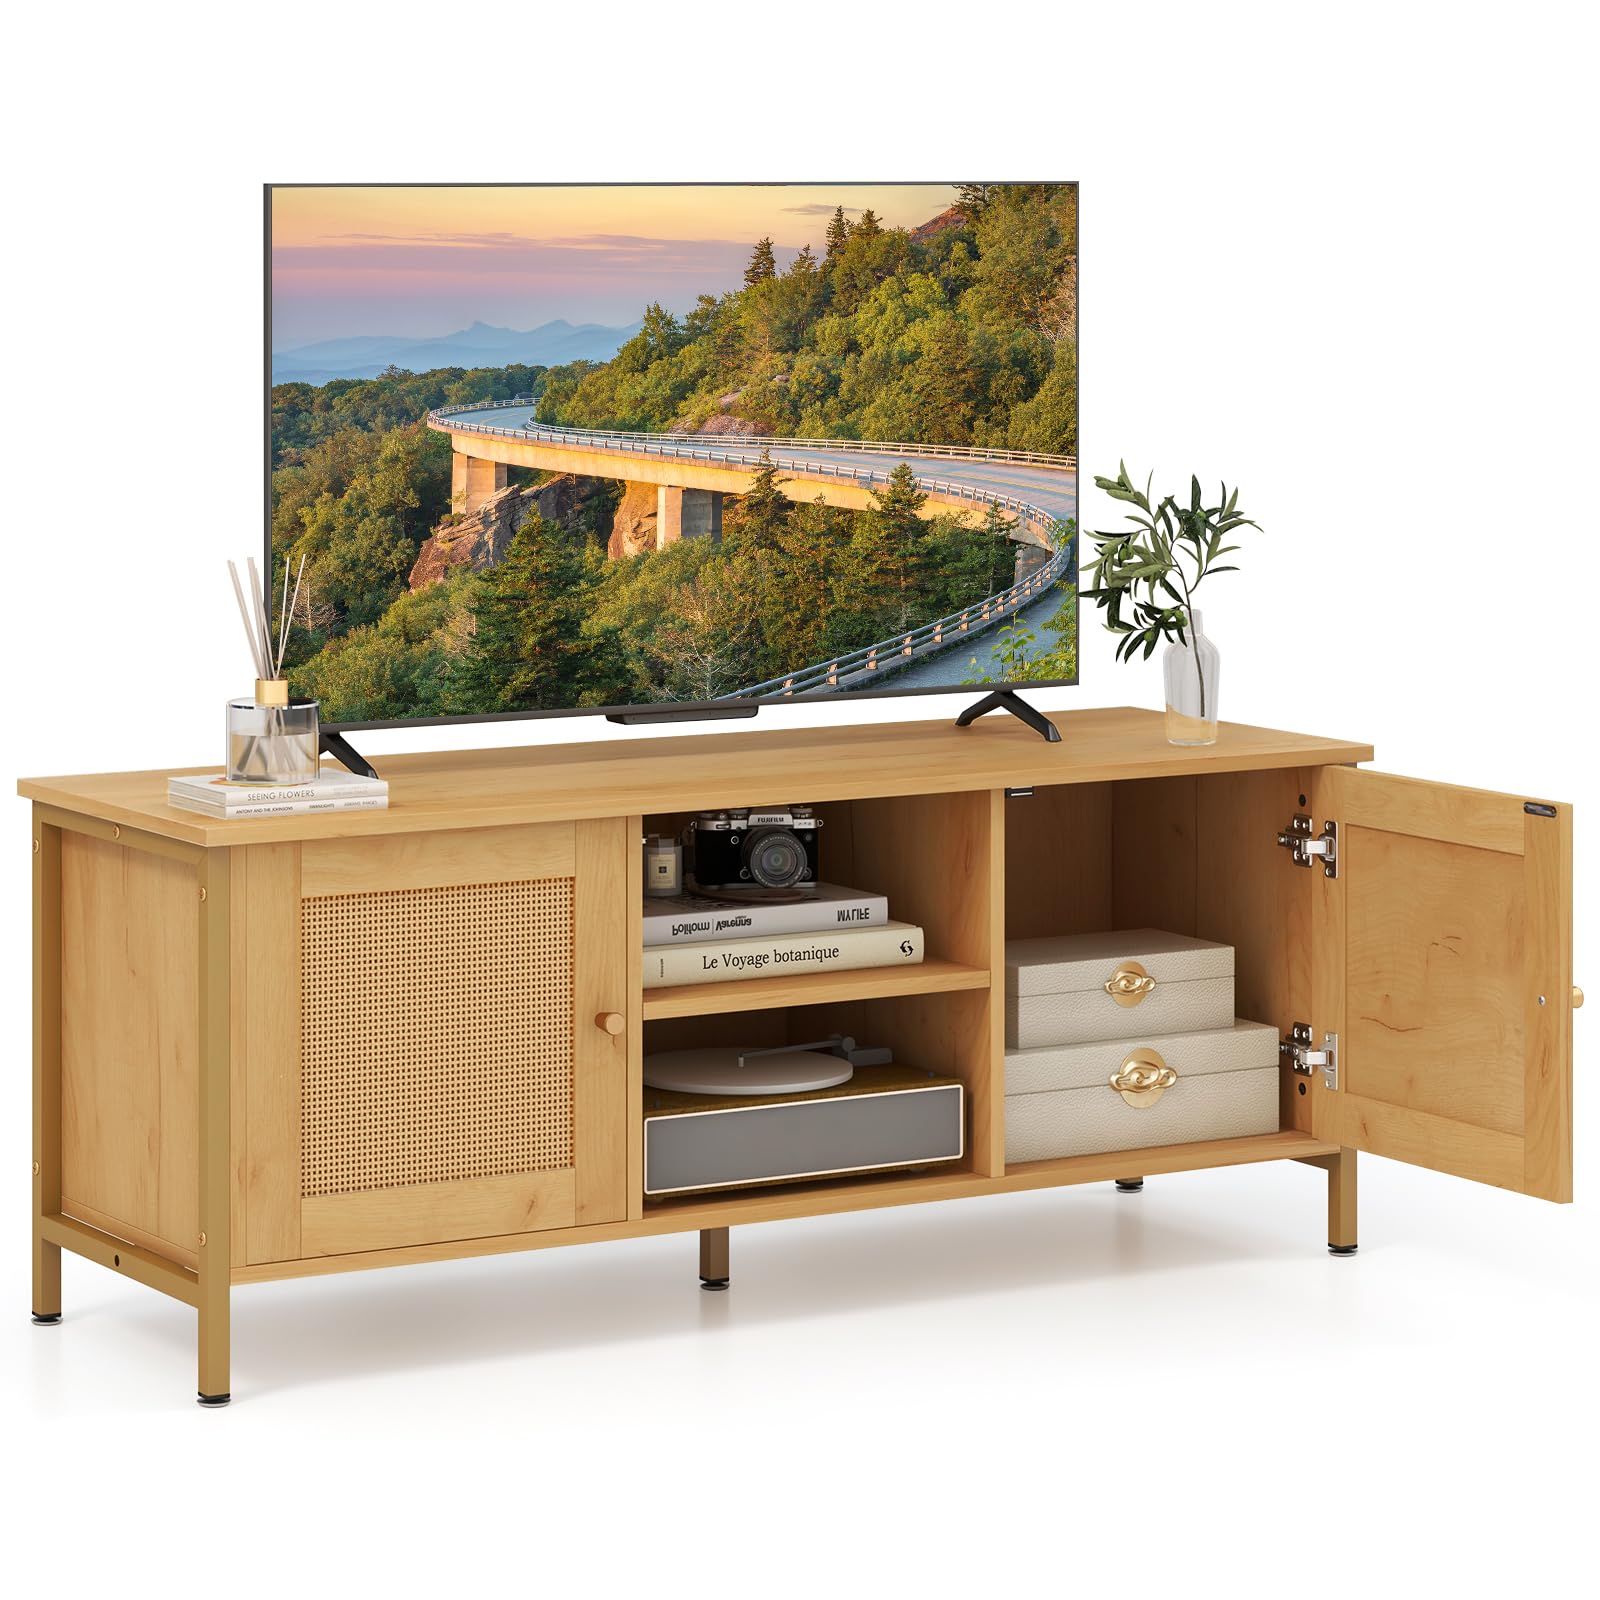 Giantex TV Stand for TVs up to 55'' - Farmhouse Entertainment Center with 2 Cabinets, Storage Shelves